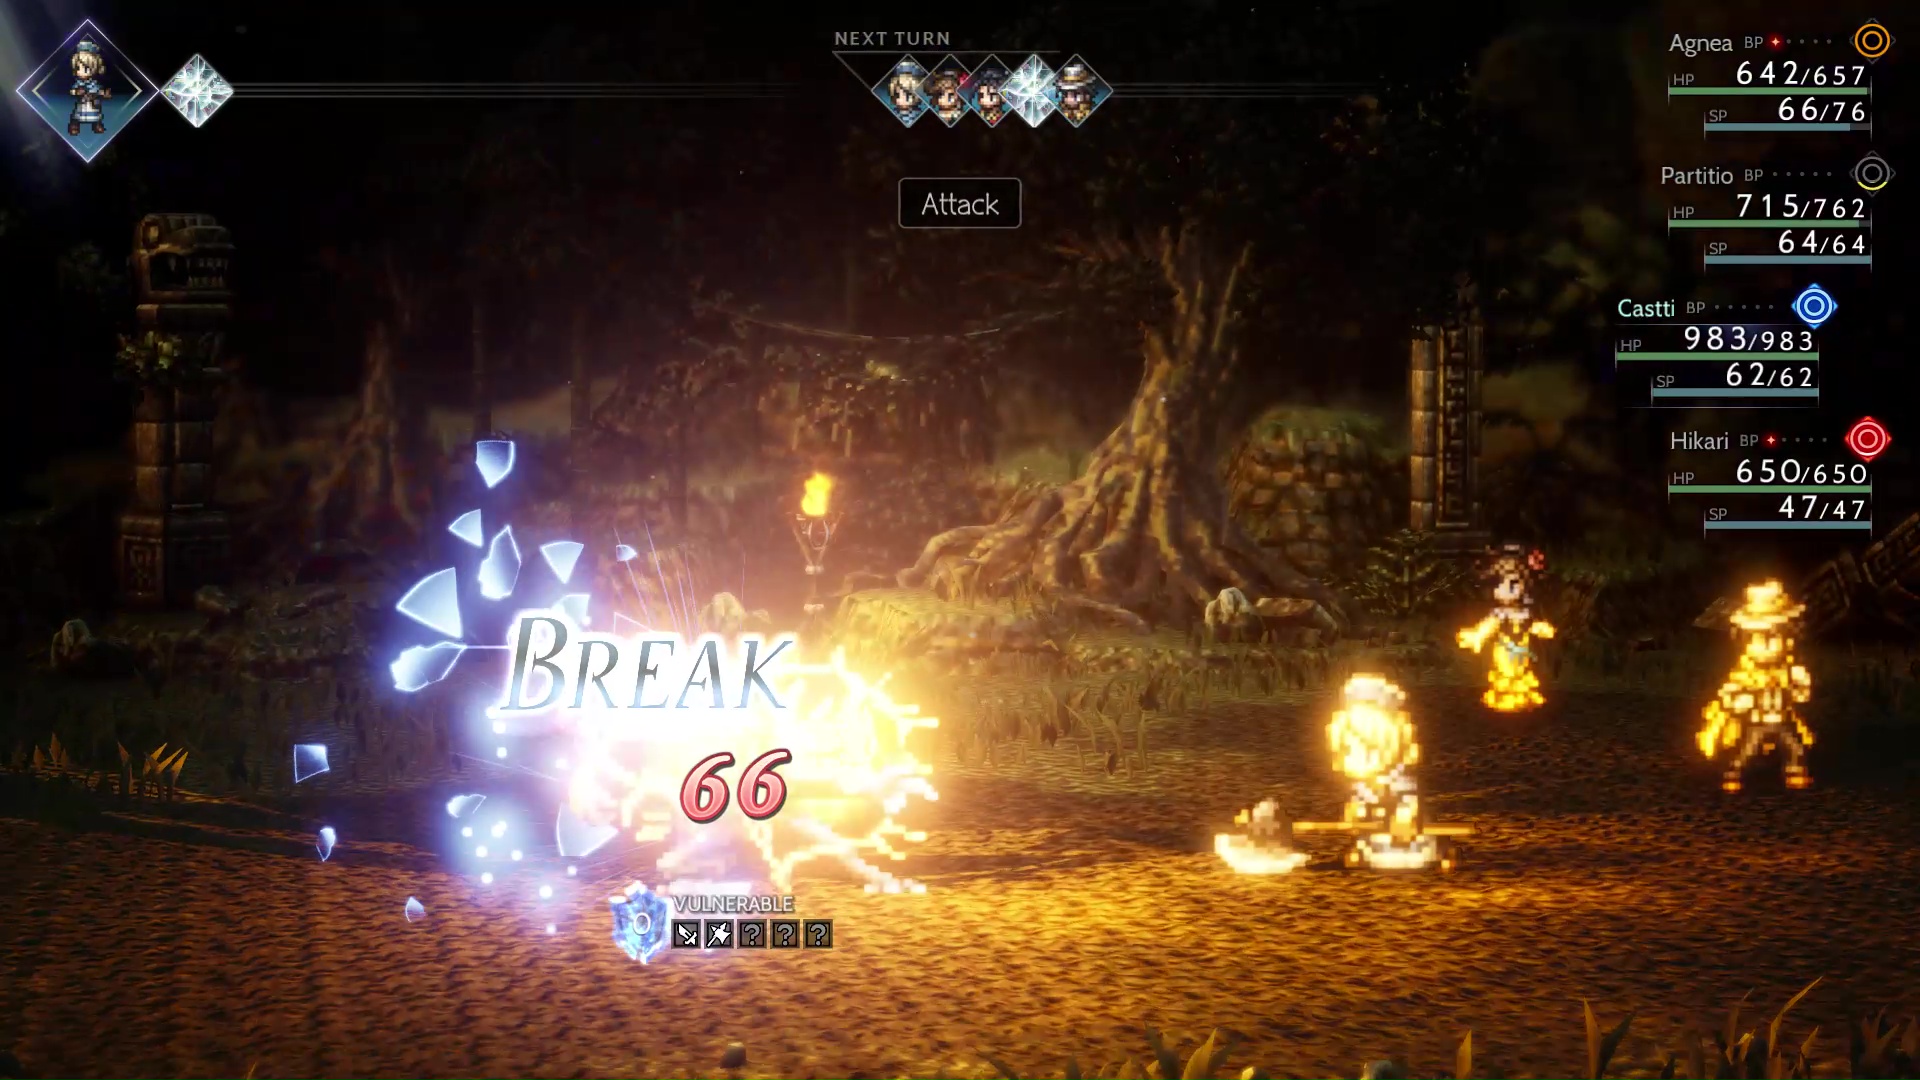 In a fight in Octopath Traveler II, the player exploits an enemy's weak point to "Break" it, which cancels its next action.